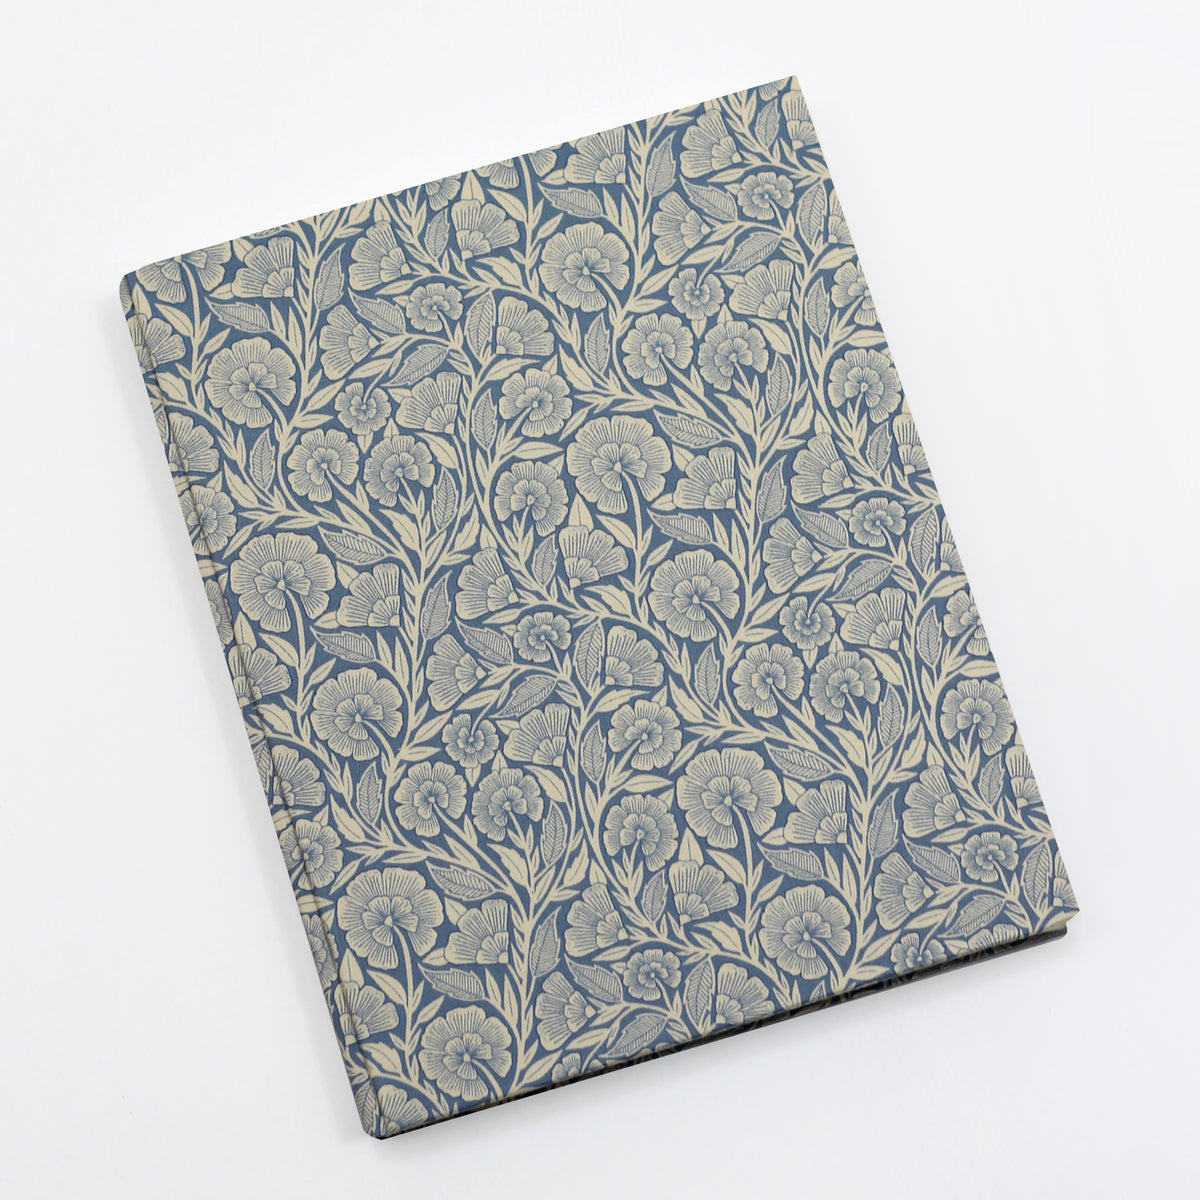 Large 8 x 10 Blank Page Journal | Limited Edition Cover: Carolina Floral